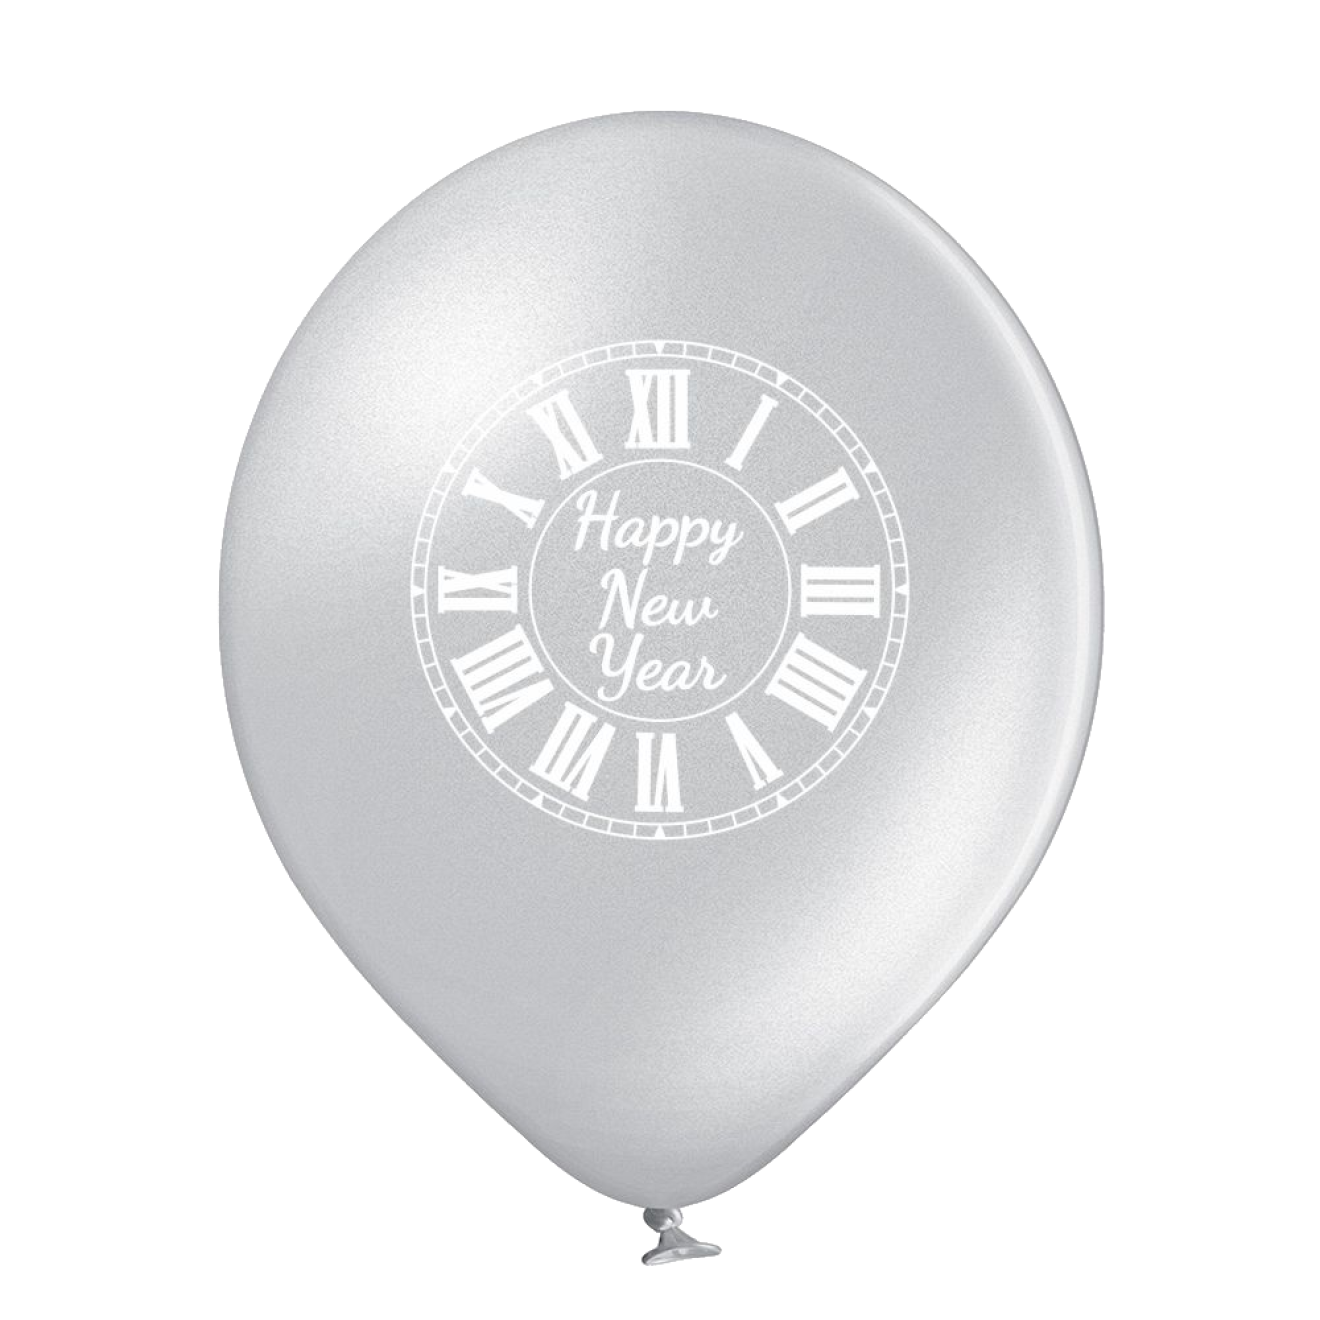 6 Luftballons Silvester: Happy New Year (Uhr) - Silber